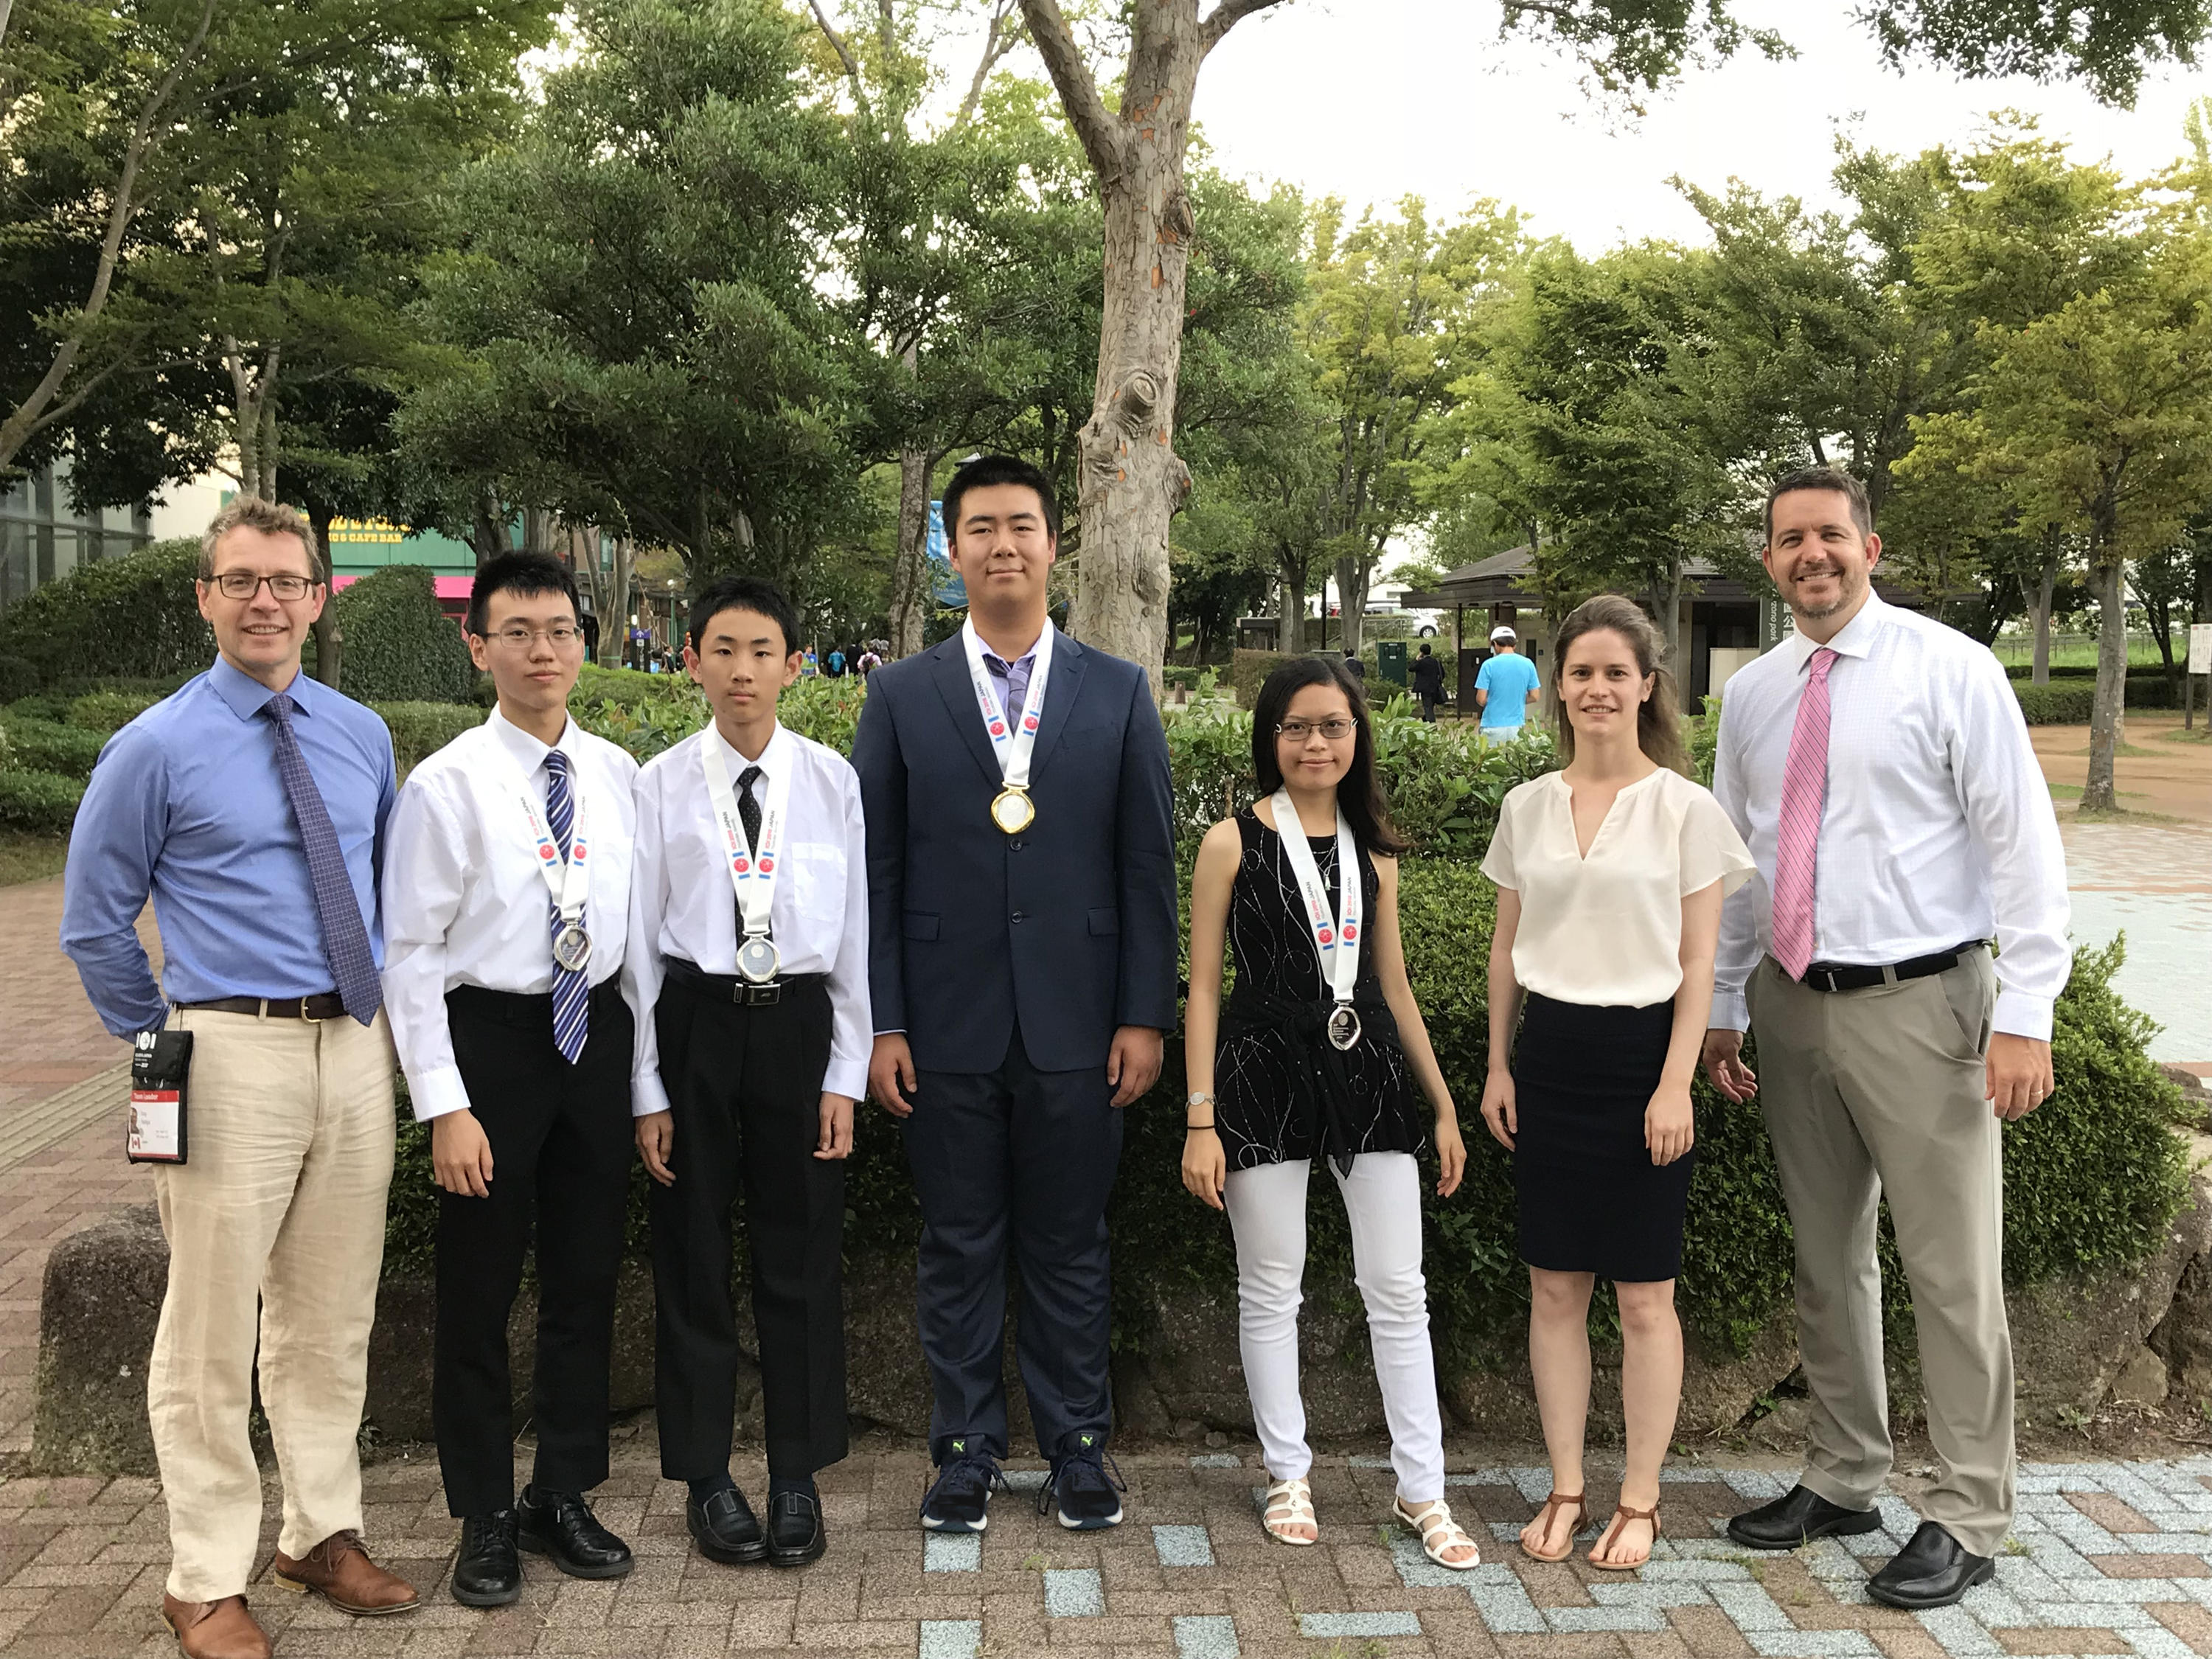 Troy Vasiga, Victor Rong, Zixiang Zhou, Joey Yu, Ava Pun, Carrie Knoll, J.P. Pretti at the 2018 International Olympiad in Inform